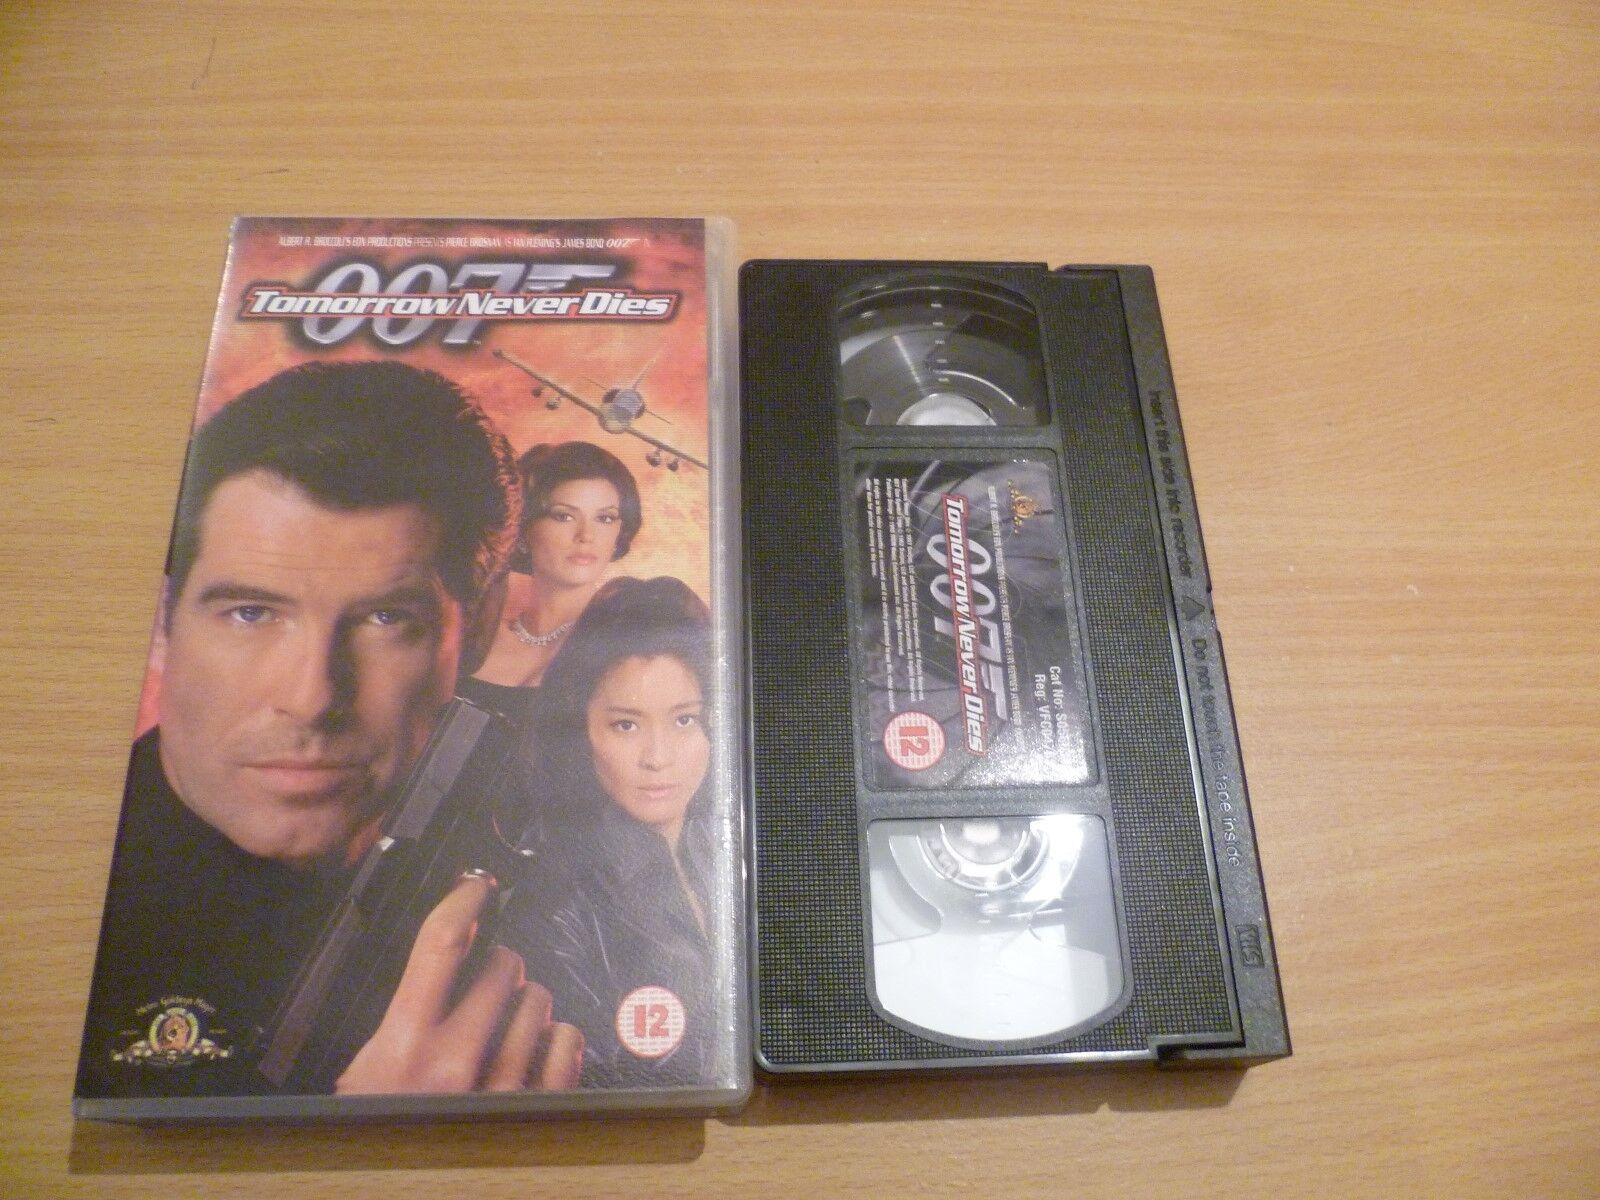 Tomorrow Never Dies (VHS, 1998) for Sale - ScienceAGogo